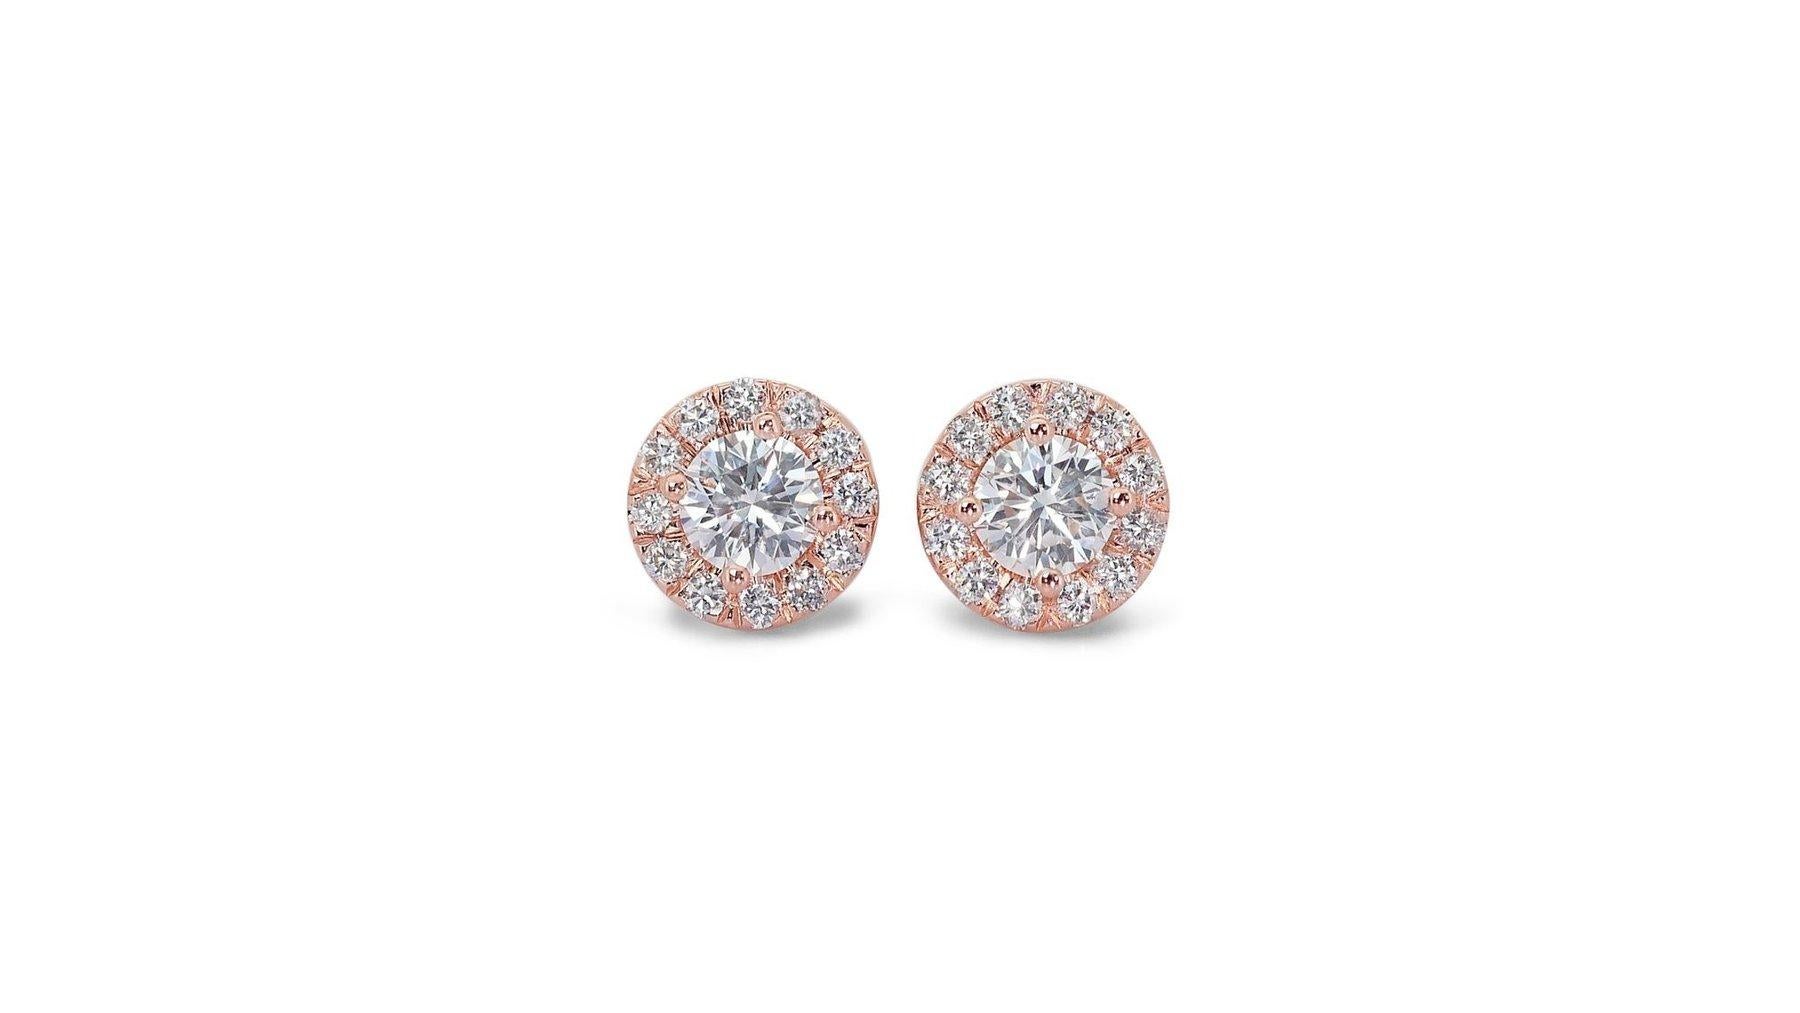 Sophisticated 2.31ct Diamonds Halo Stud Earrings in 18k Rose Gold - GIA  For Sale 4